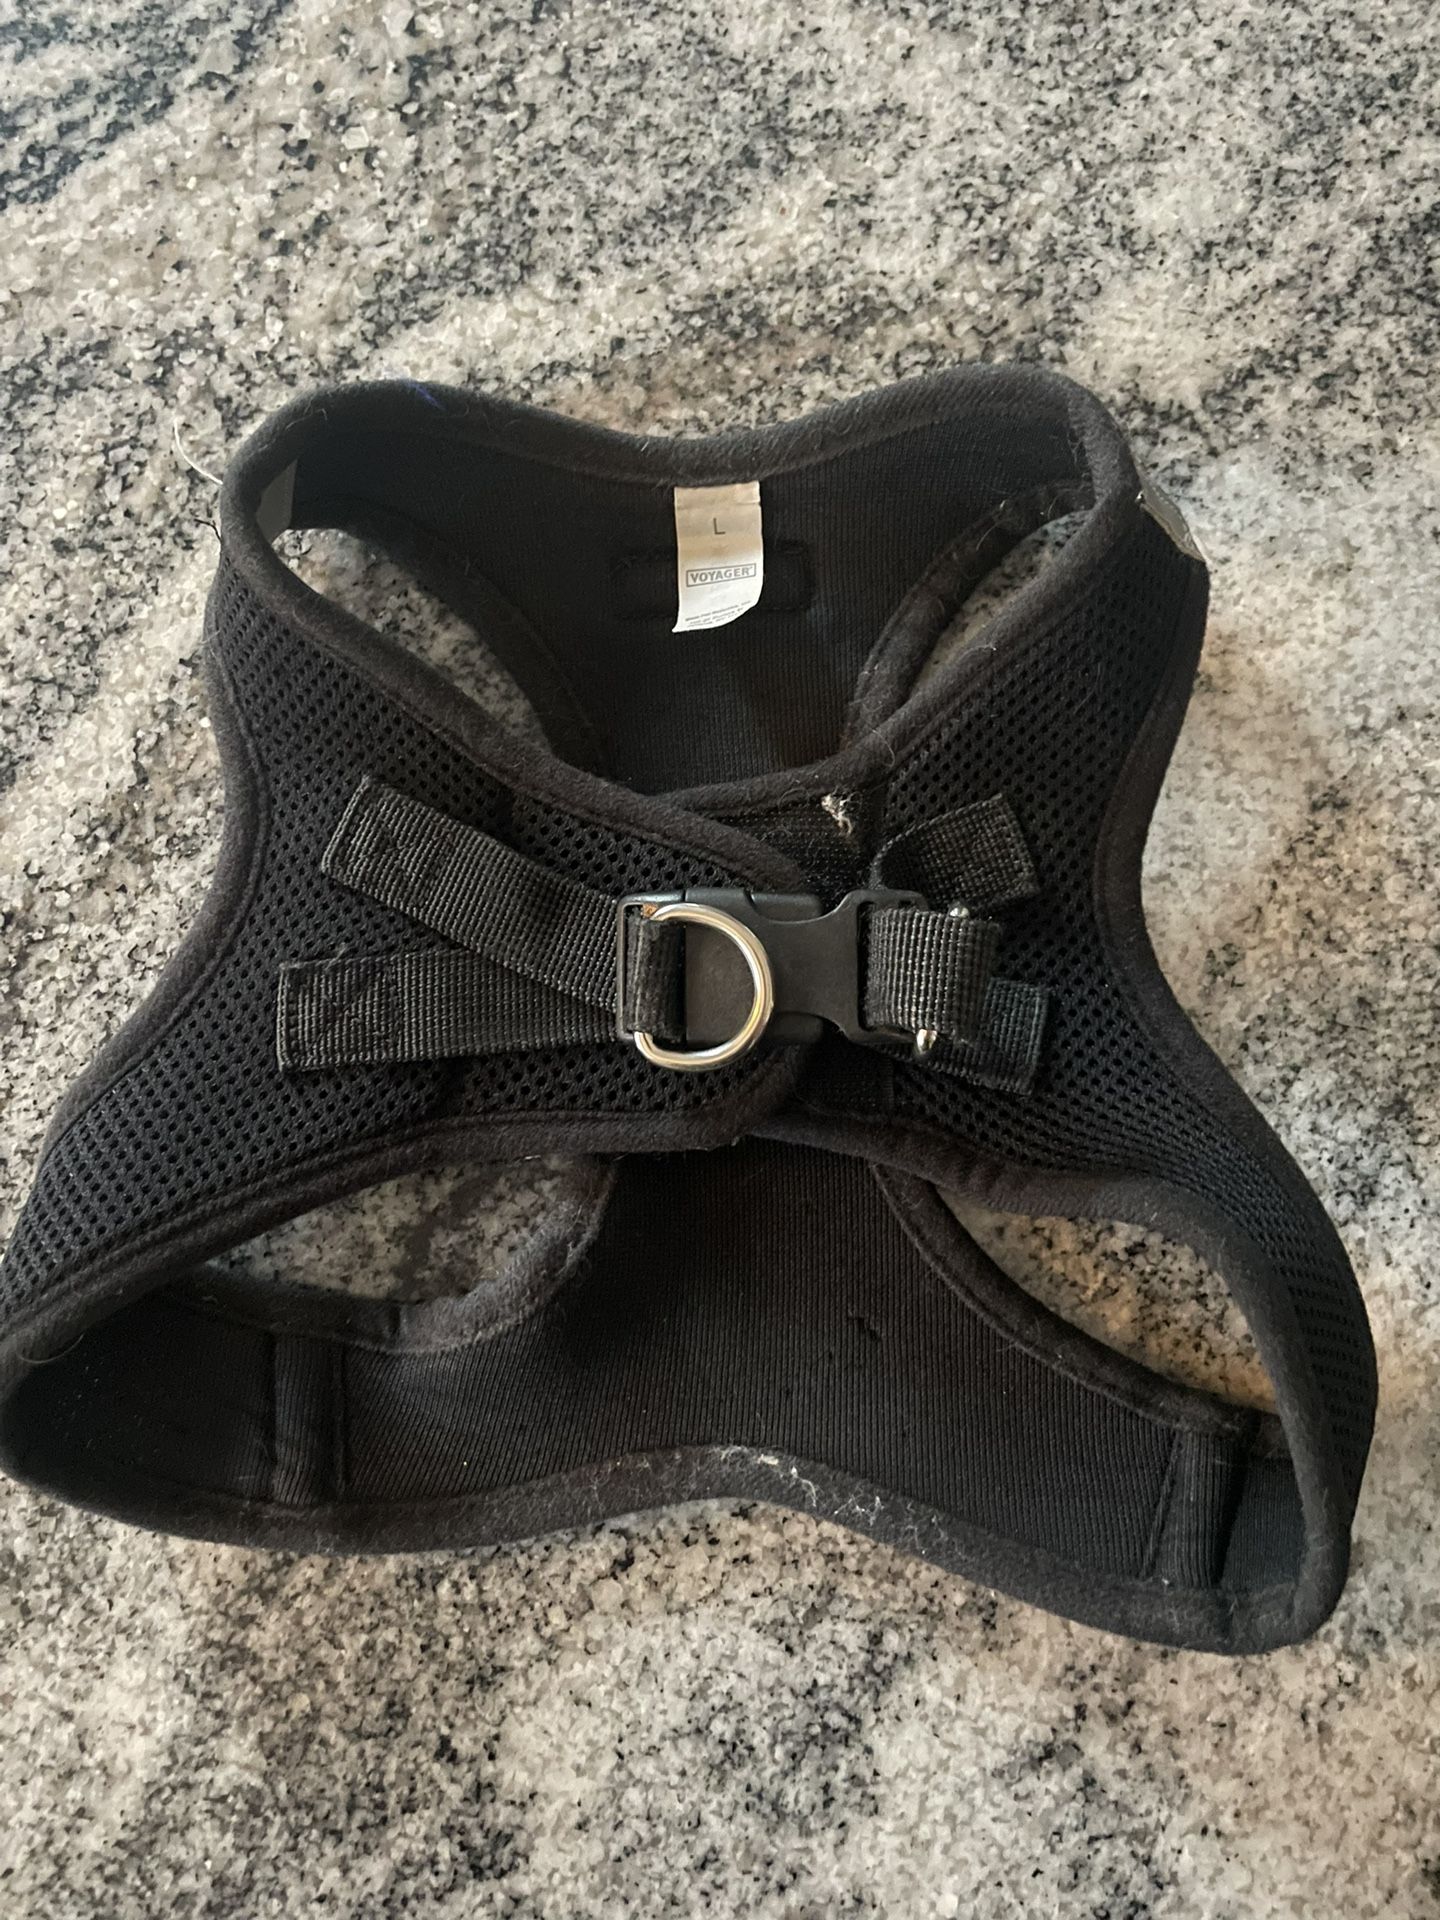 Voyager Dog Harness Size L